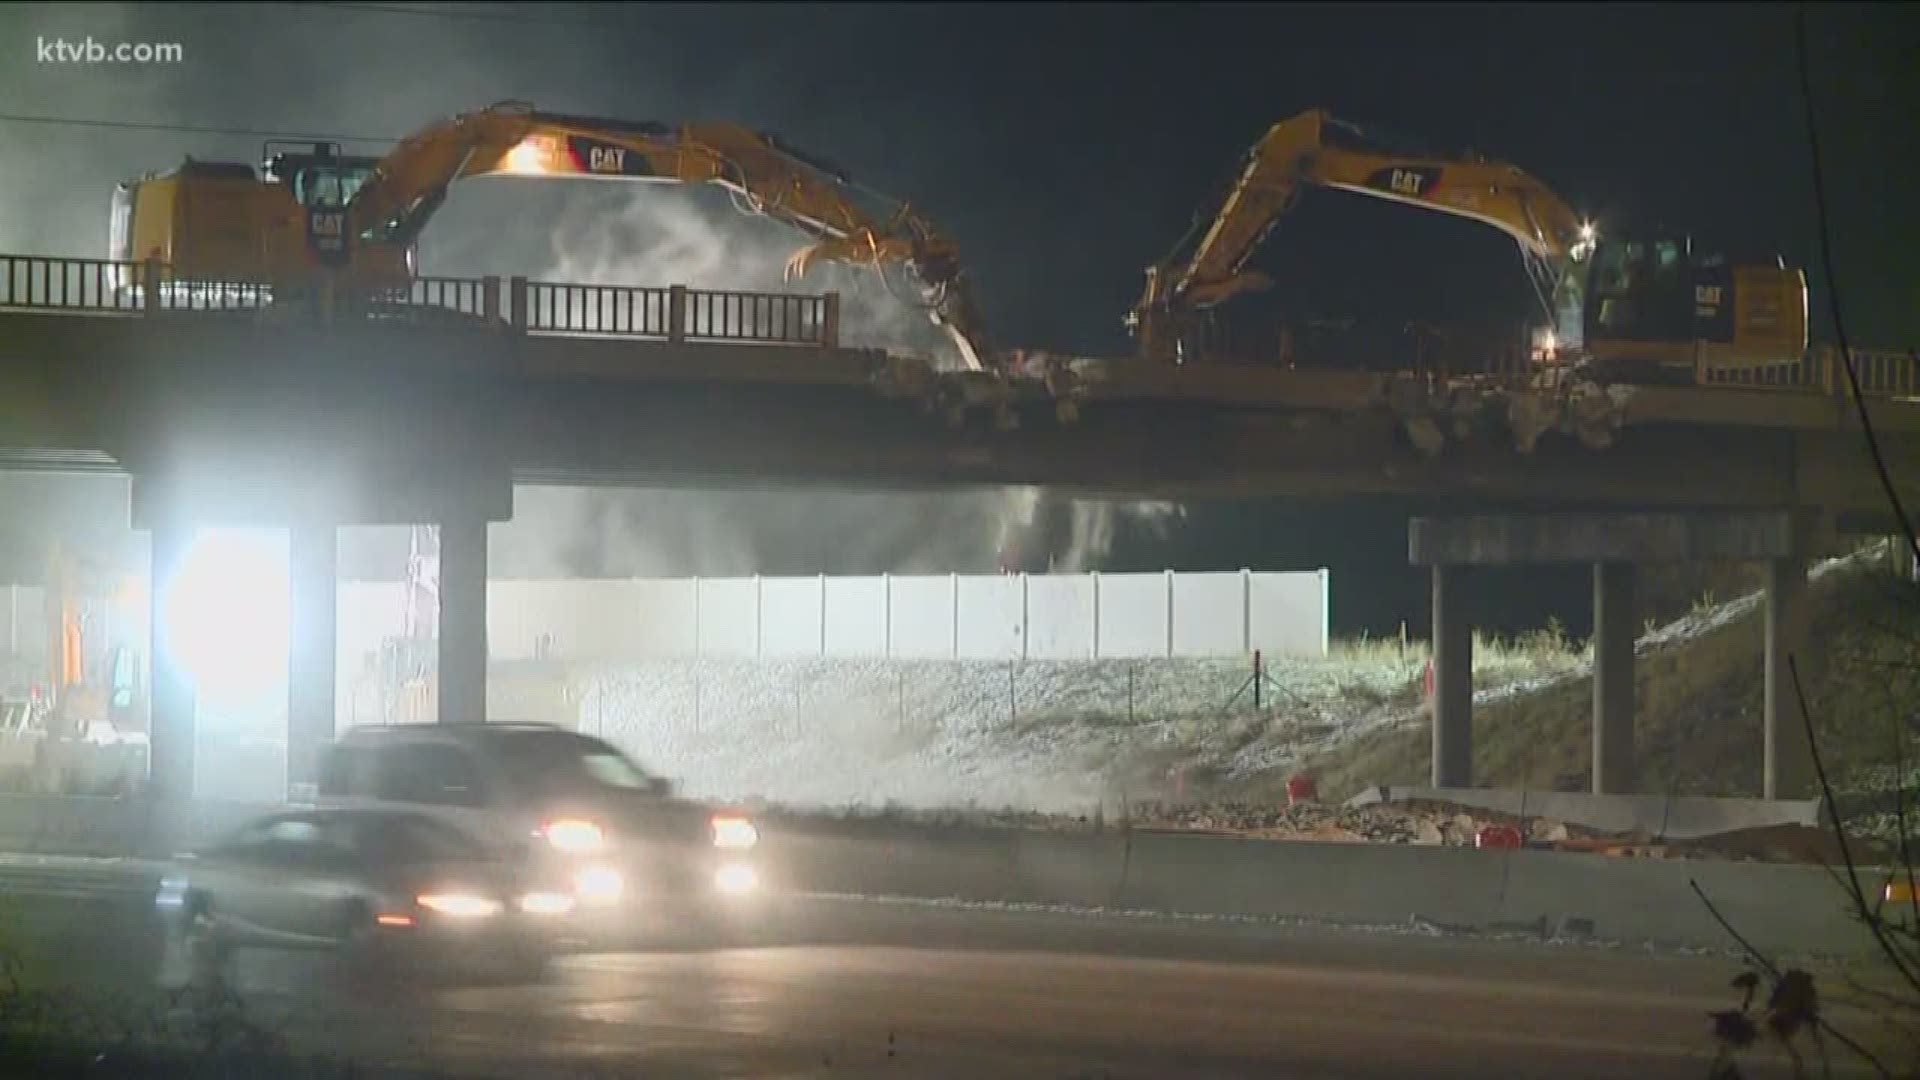 A large stretch of Interstate 84 will be shut down overnight Monday and Tuesday as crews work to demolish the Cloverdale Road overpass.